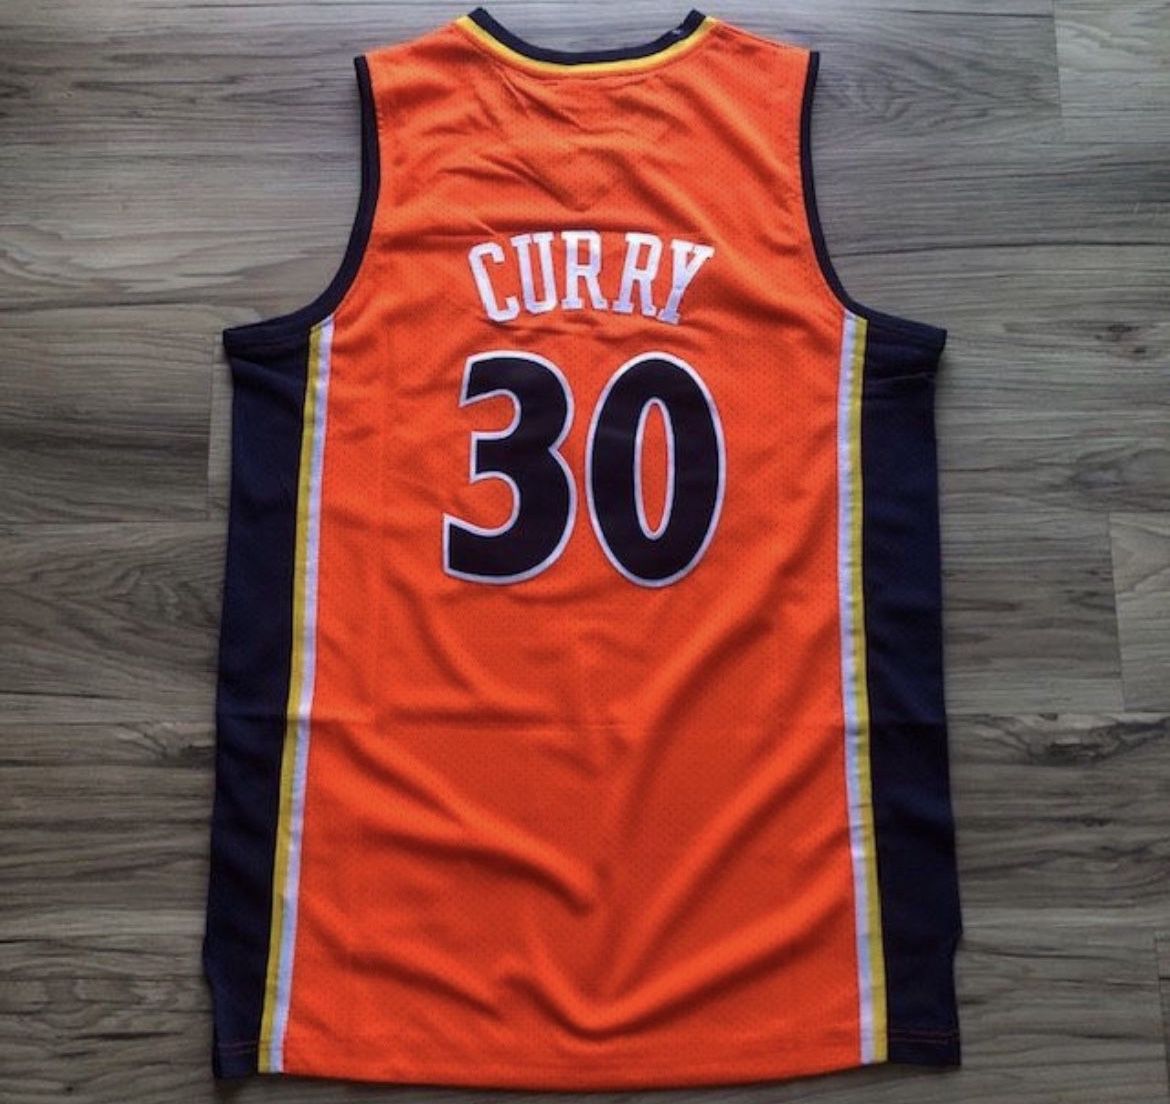 mitchell and ness stephen curry jersey